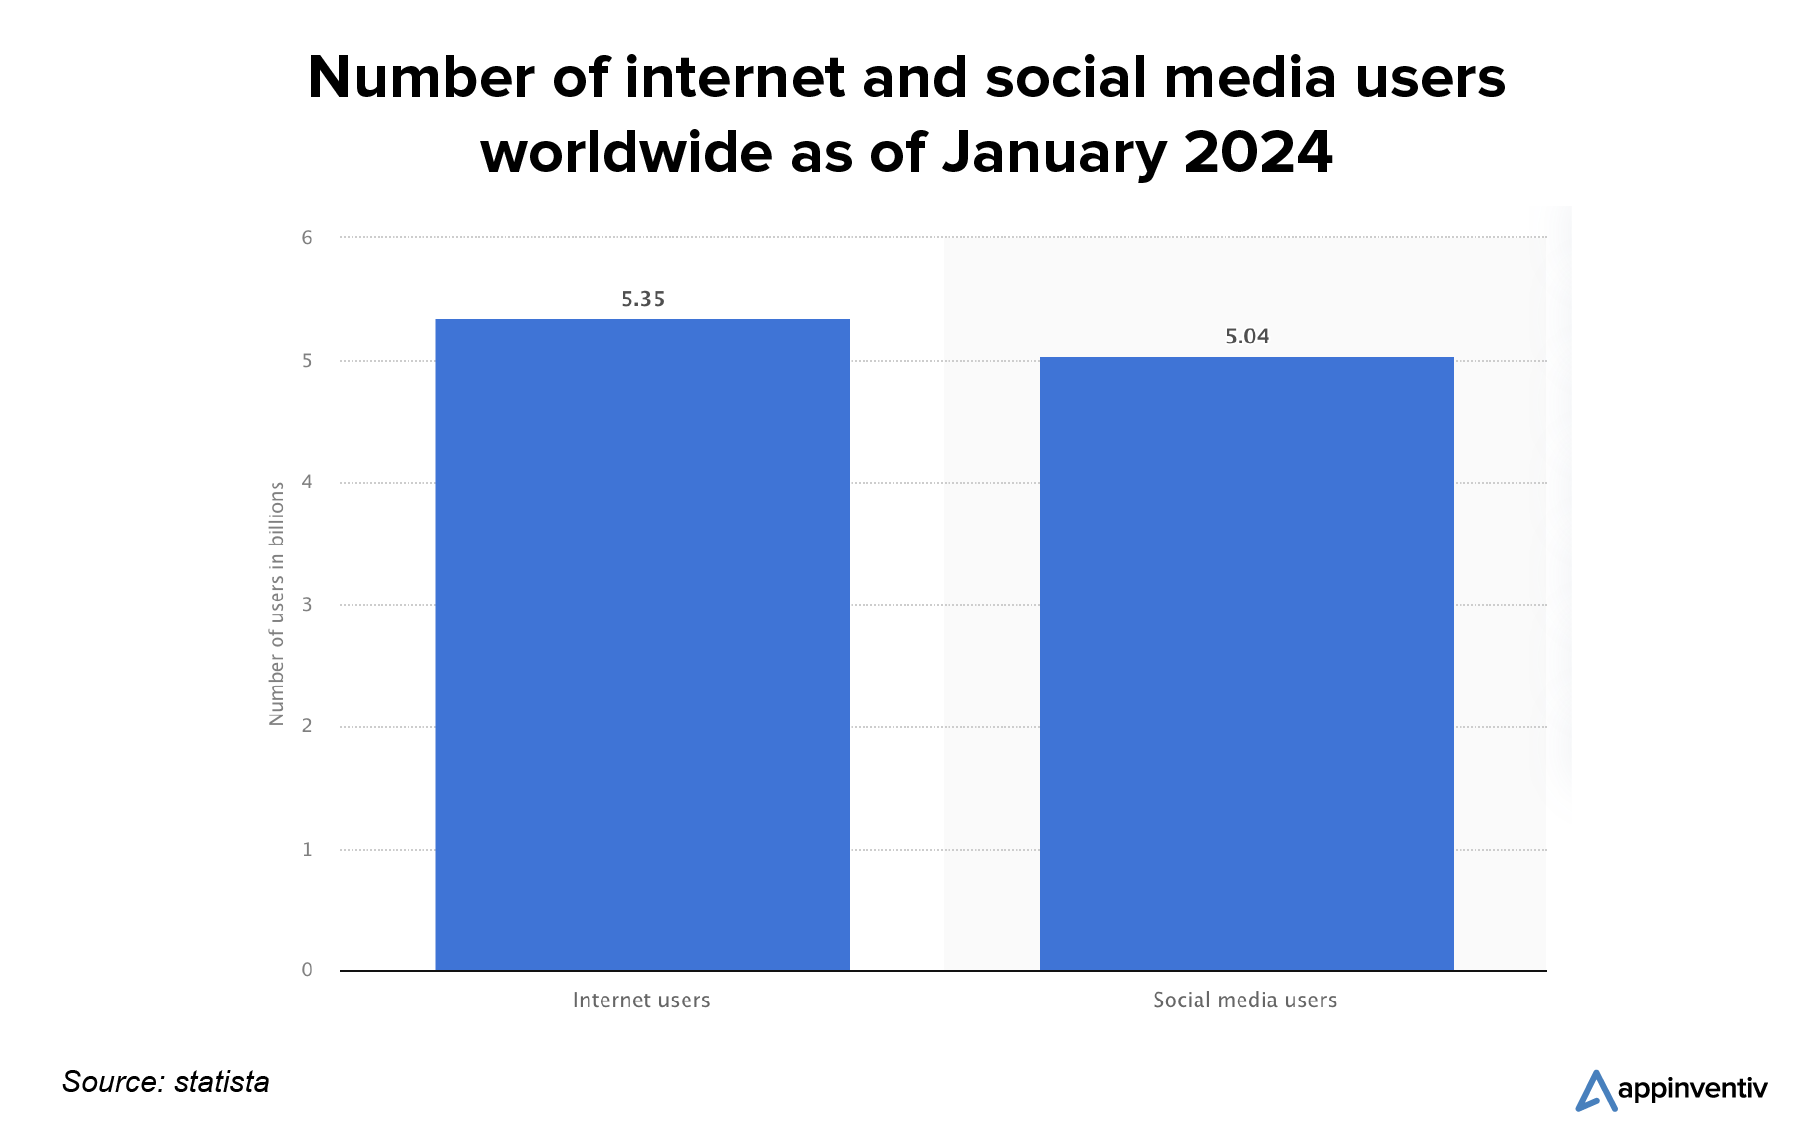 Number of internet and social media users worldwide as of January 2024